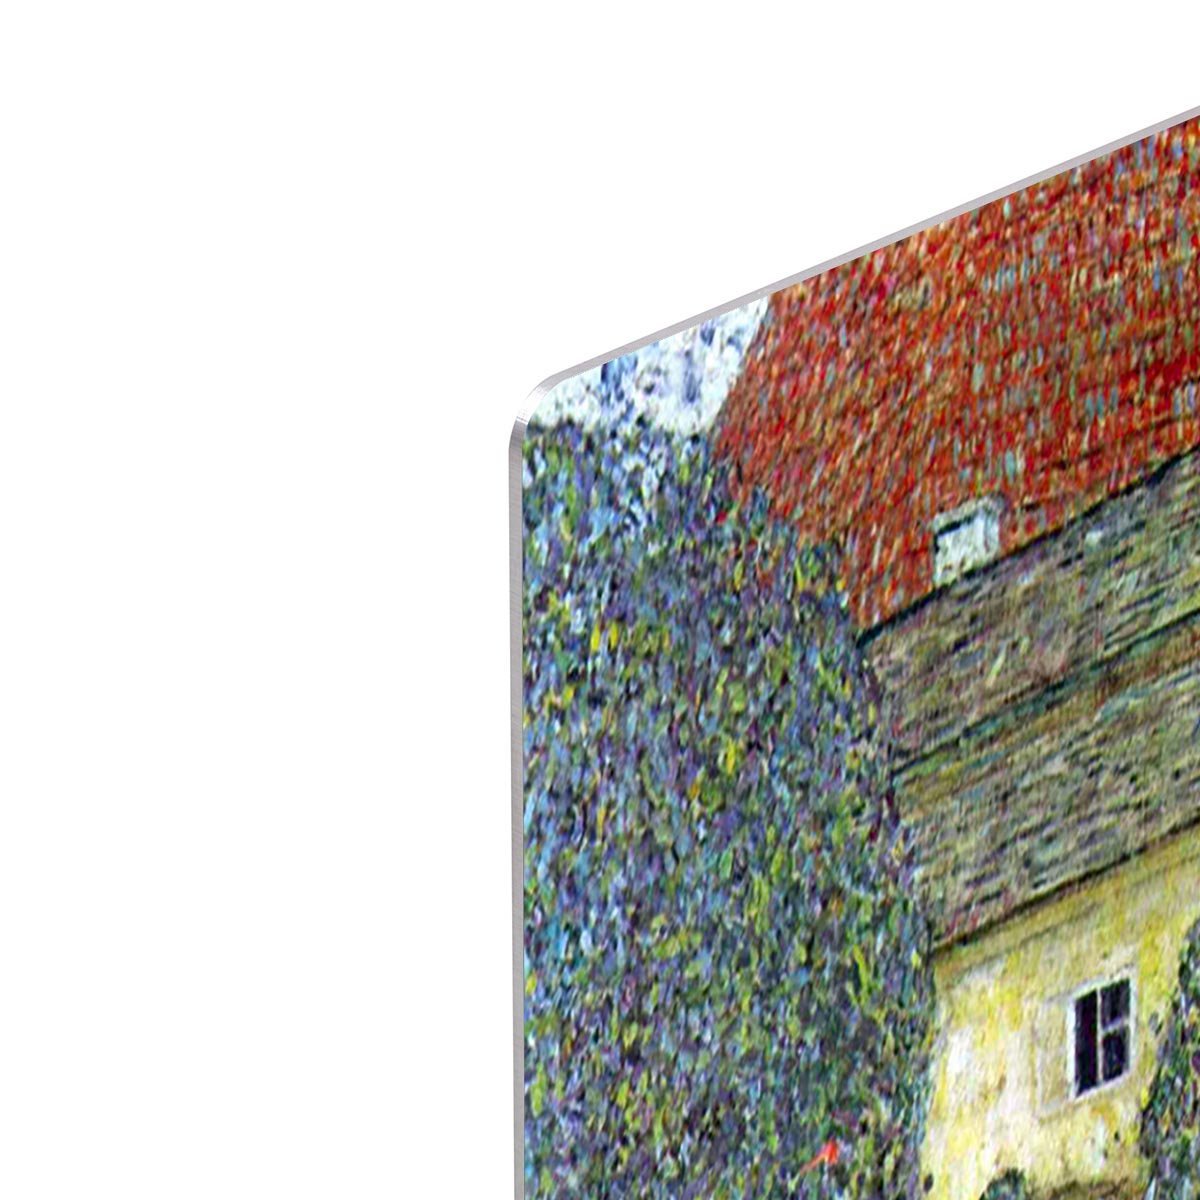 Castle at the Attersee by Klimt HD Metal Print